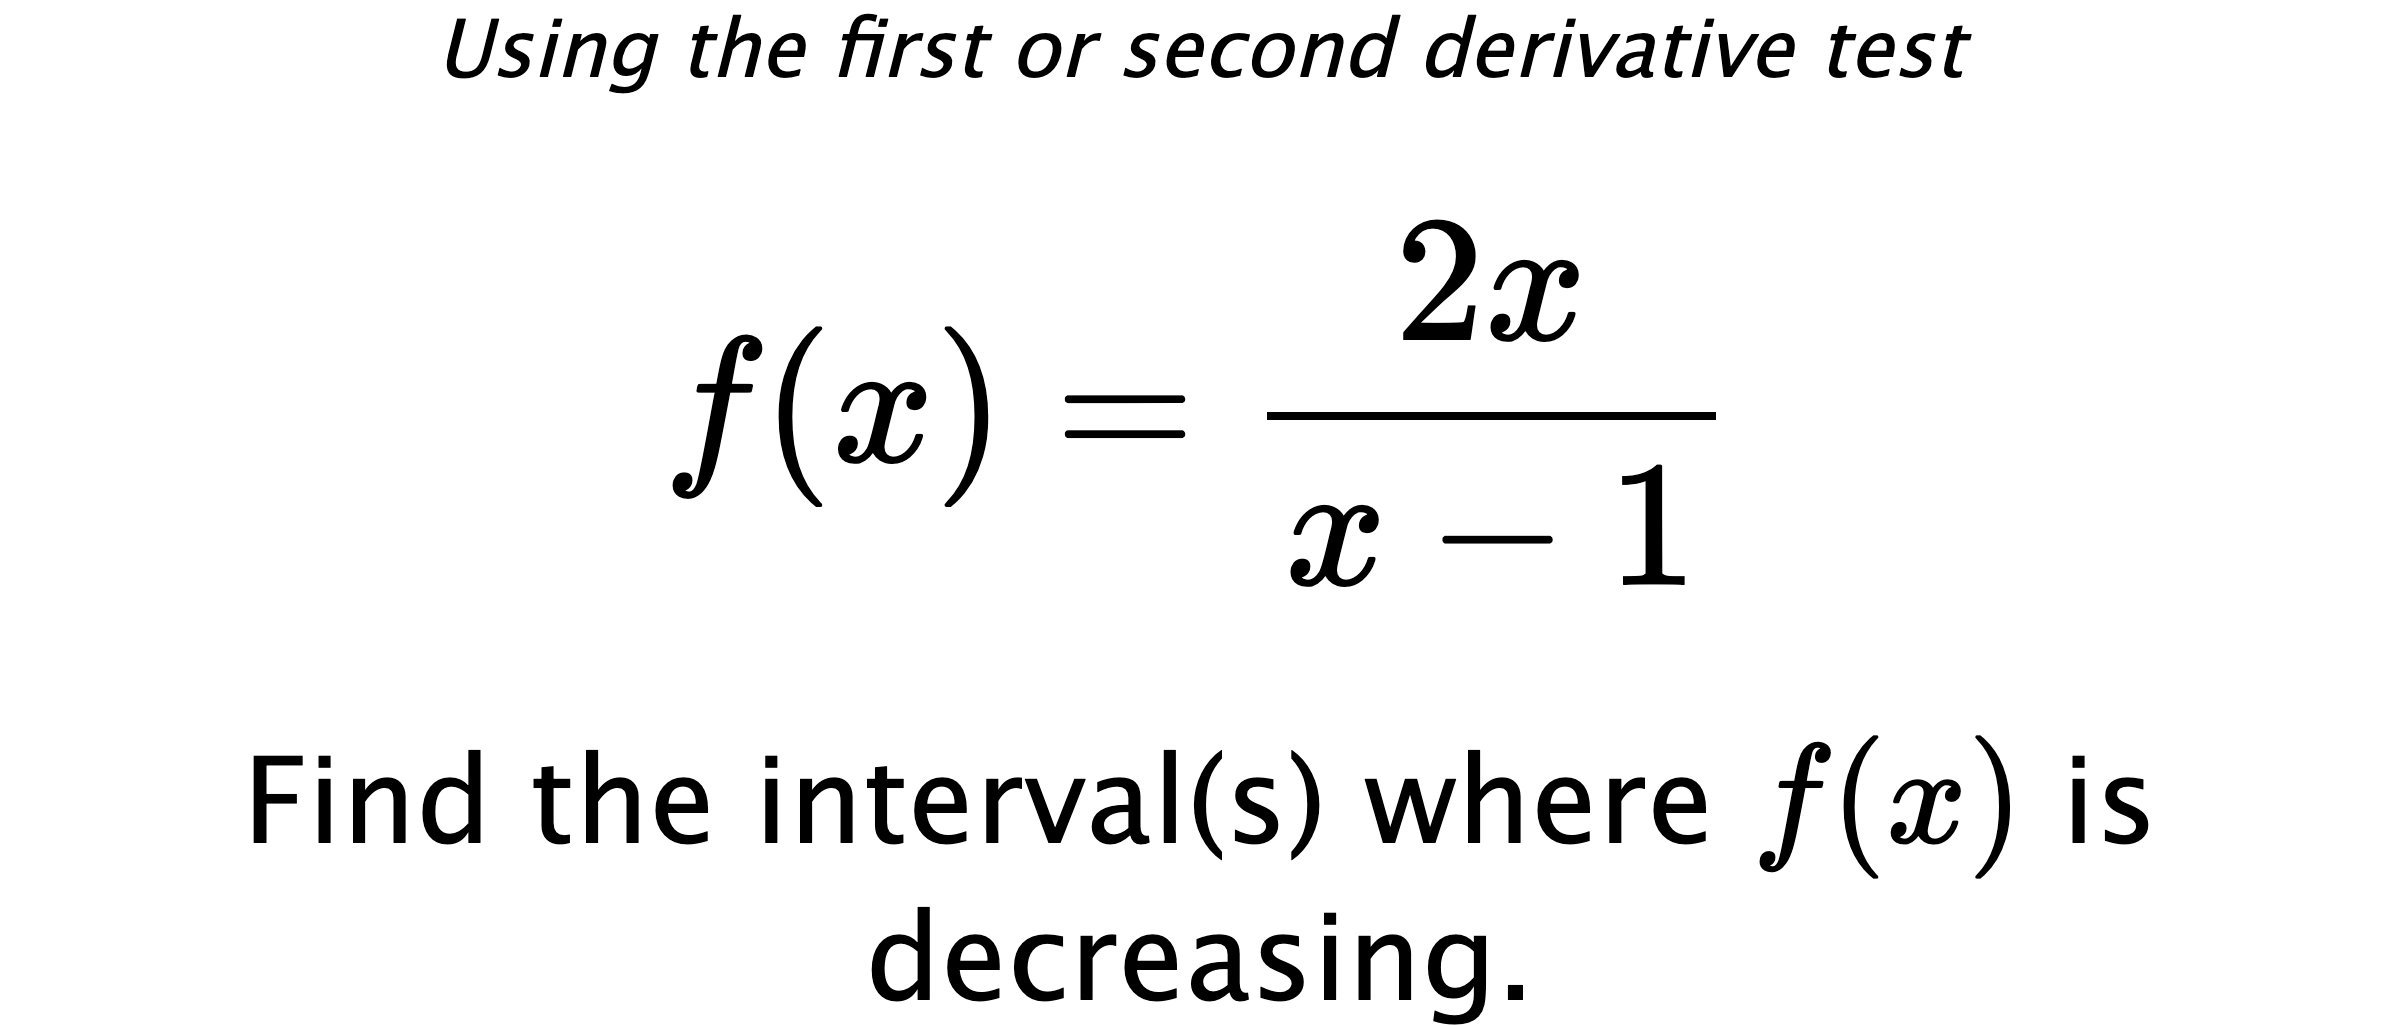 Using the first or second derivative test $$ f(x)=\frac{2x}{x-1} $$ Find the interval(s) where $ f(x) $ is decreasing.